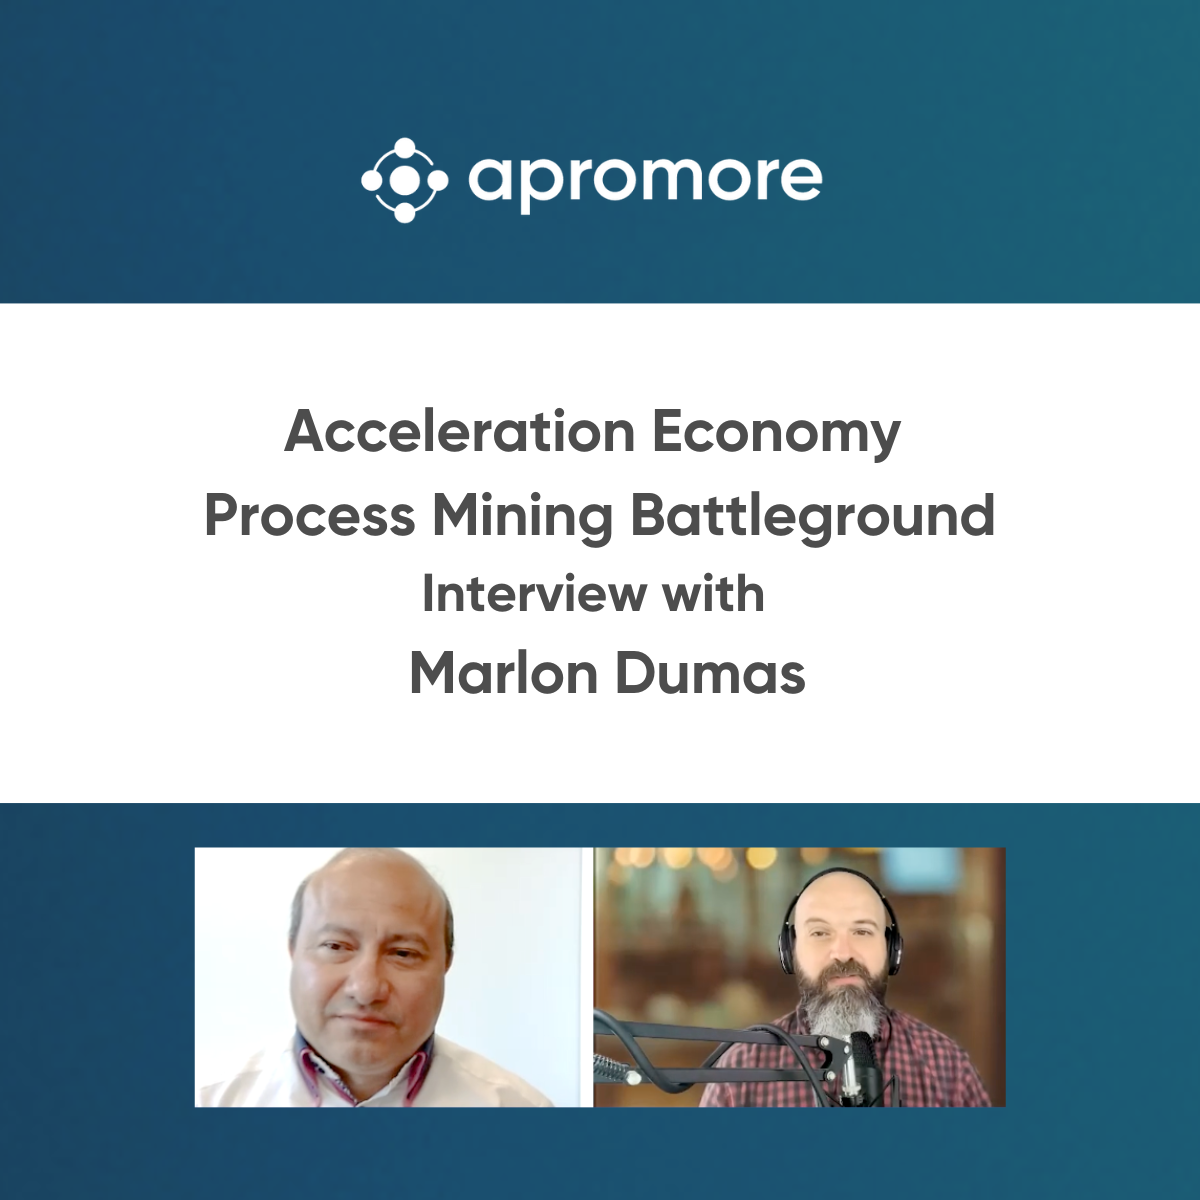 Process Mining Battleground: Interview with Apromore’s Co-Founder Marlon Dumas